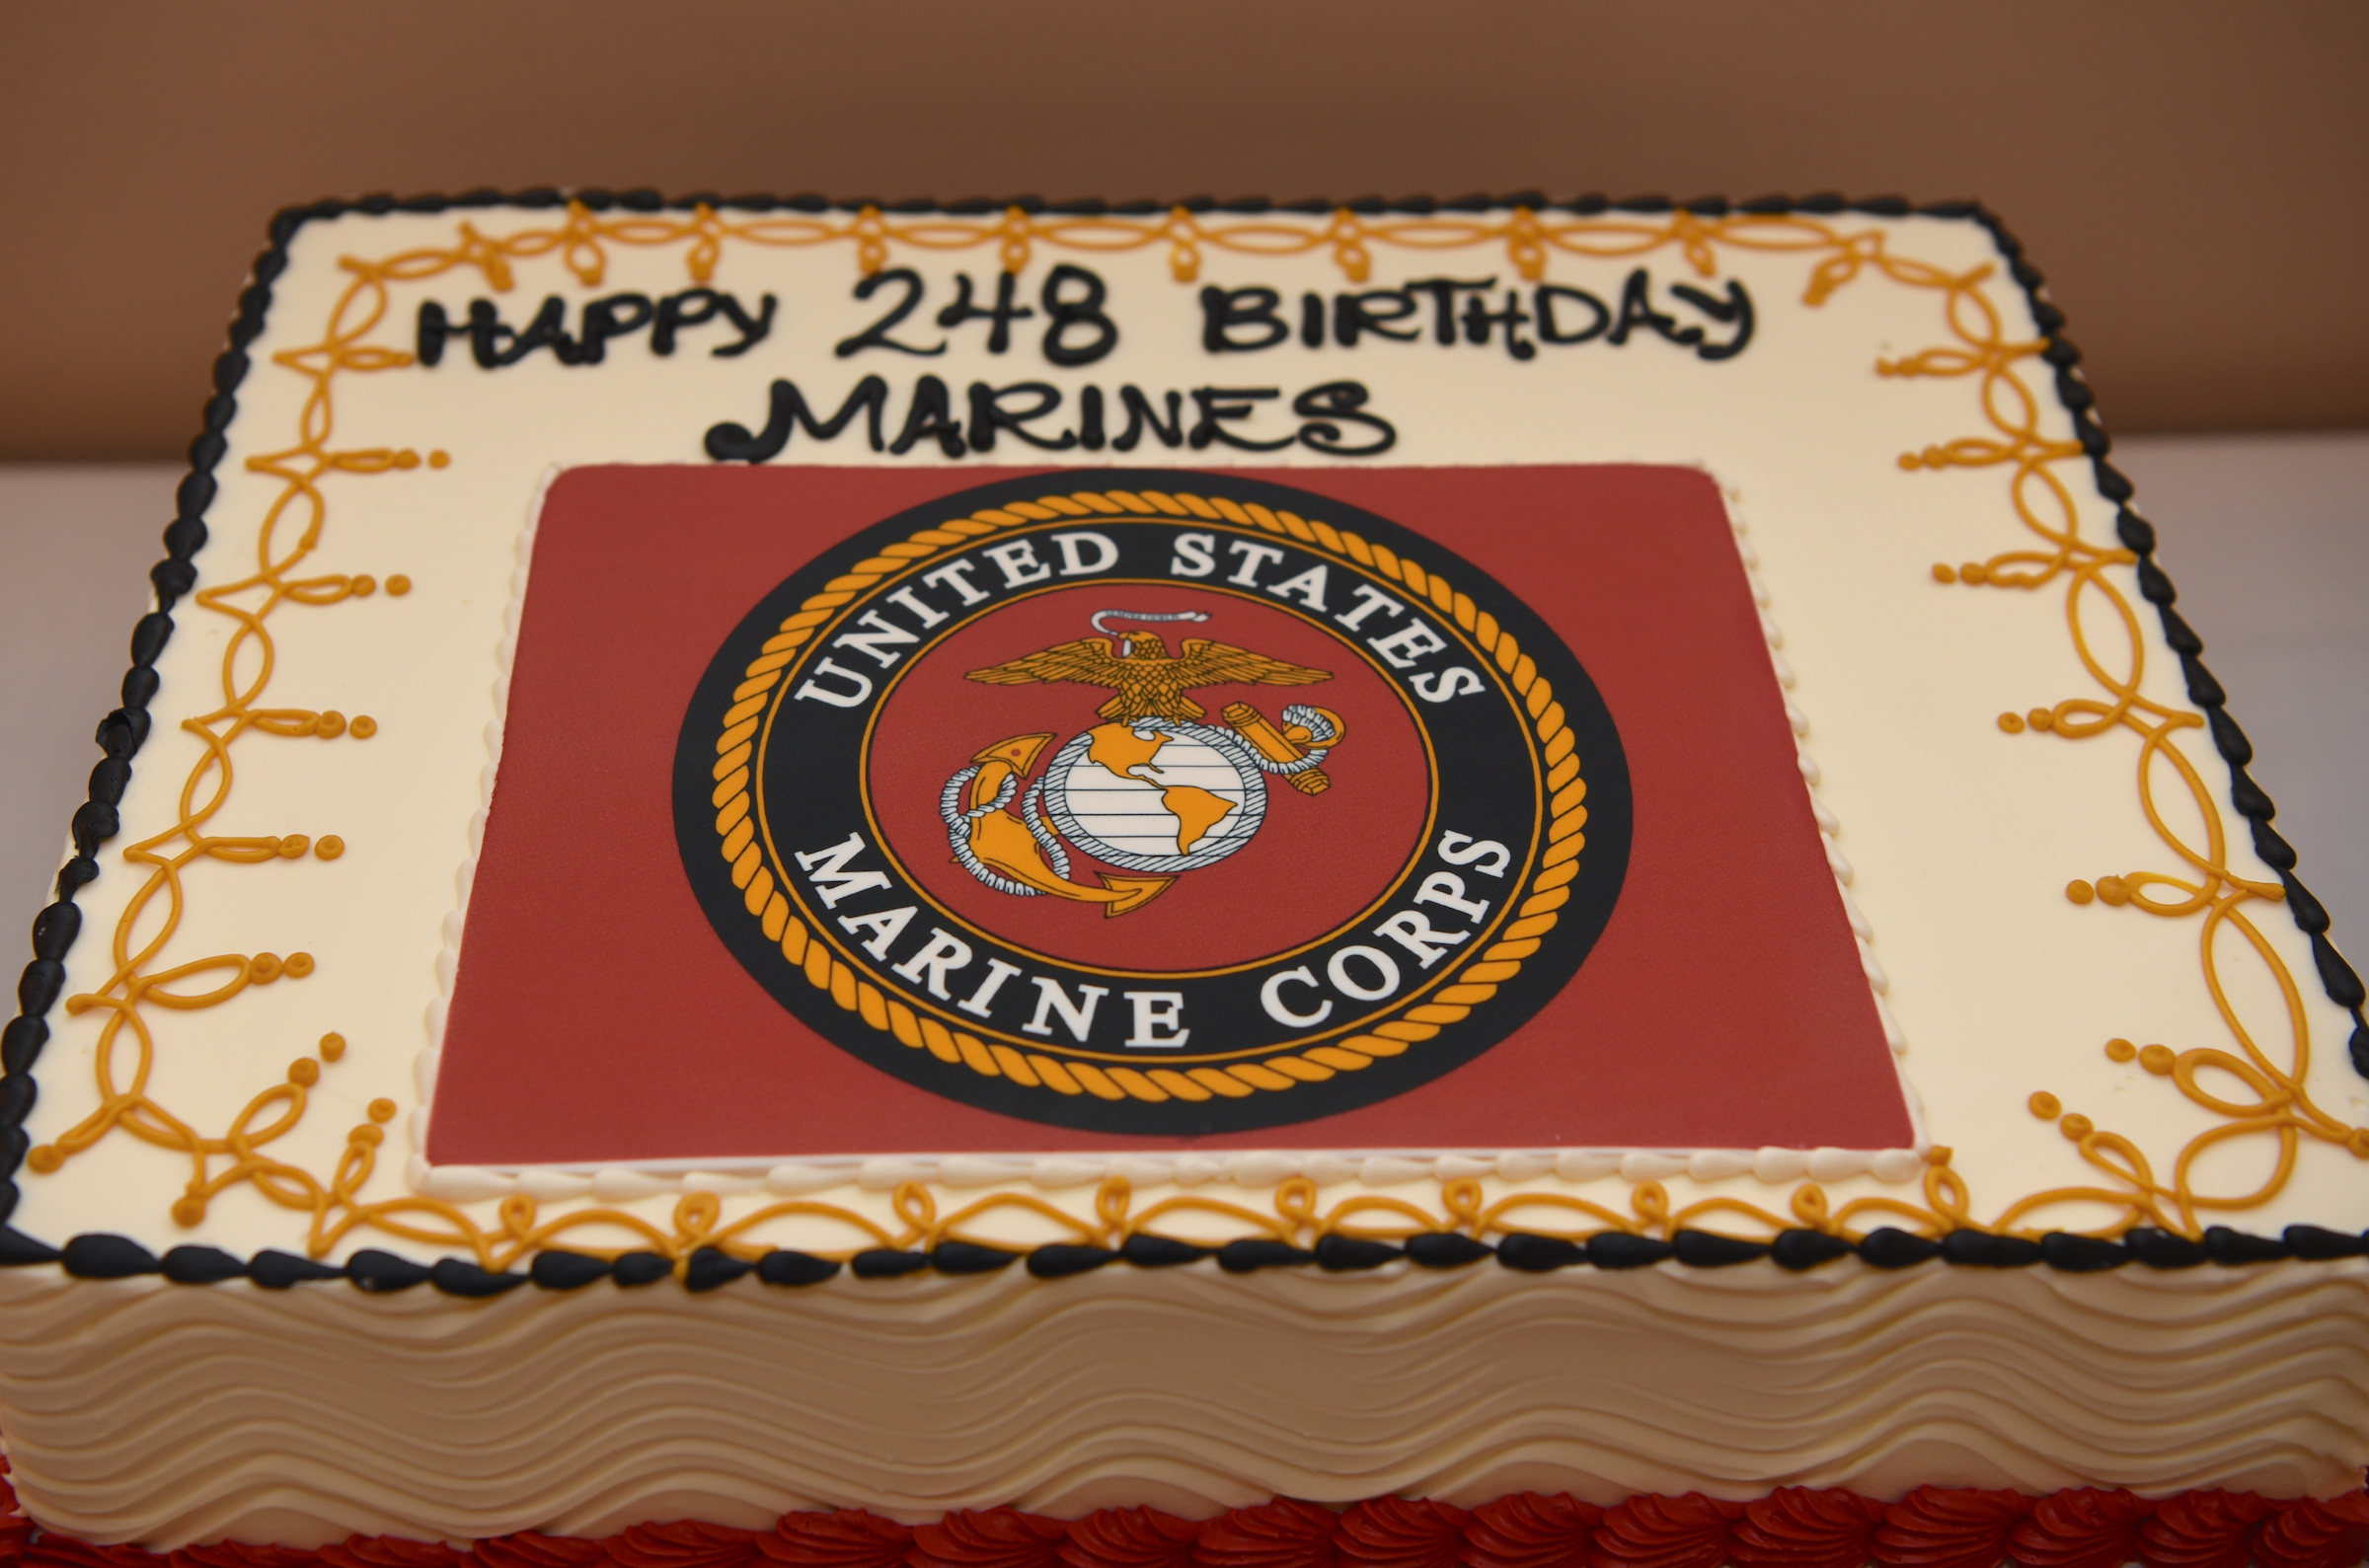 The event coincided with the 248th birthday of the United States Marine Corps. (Photo by Kathy Hillegonds / DePaul University)